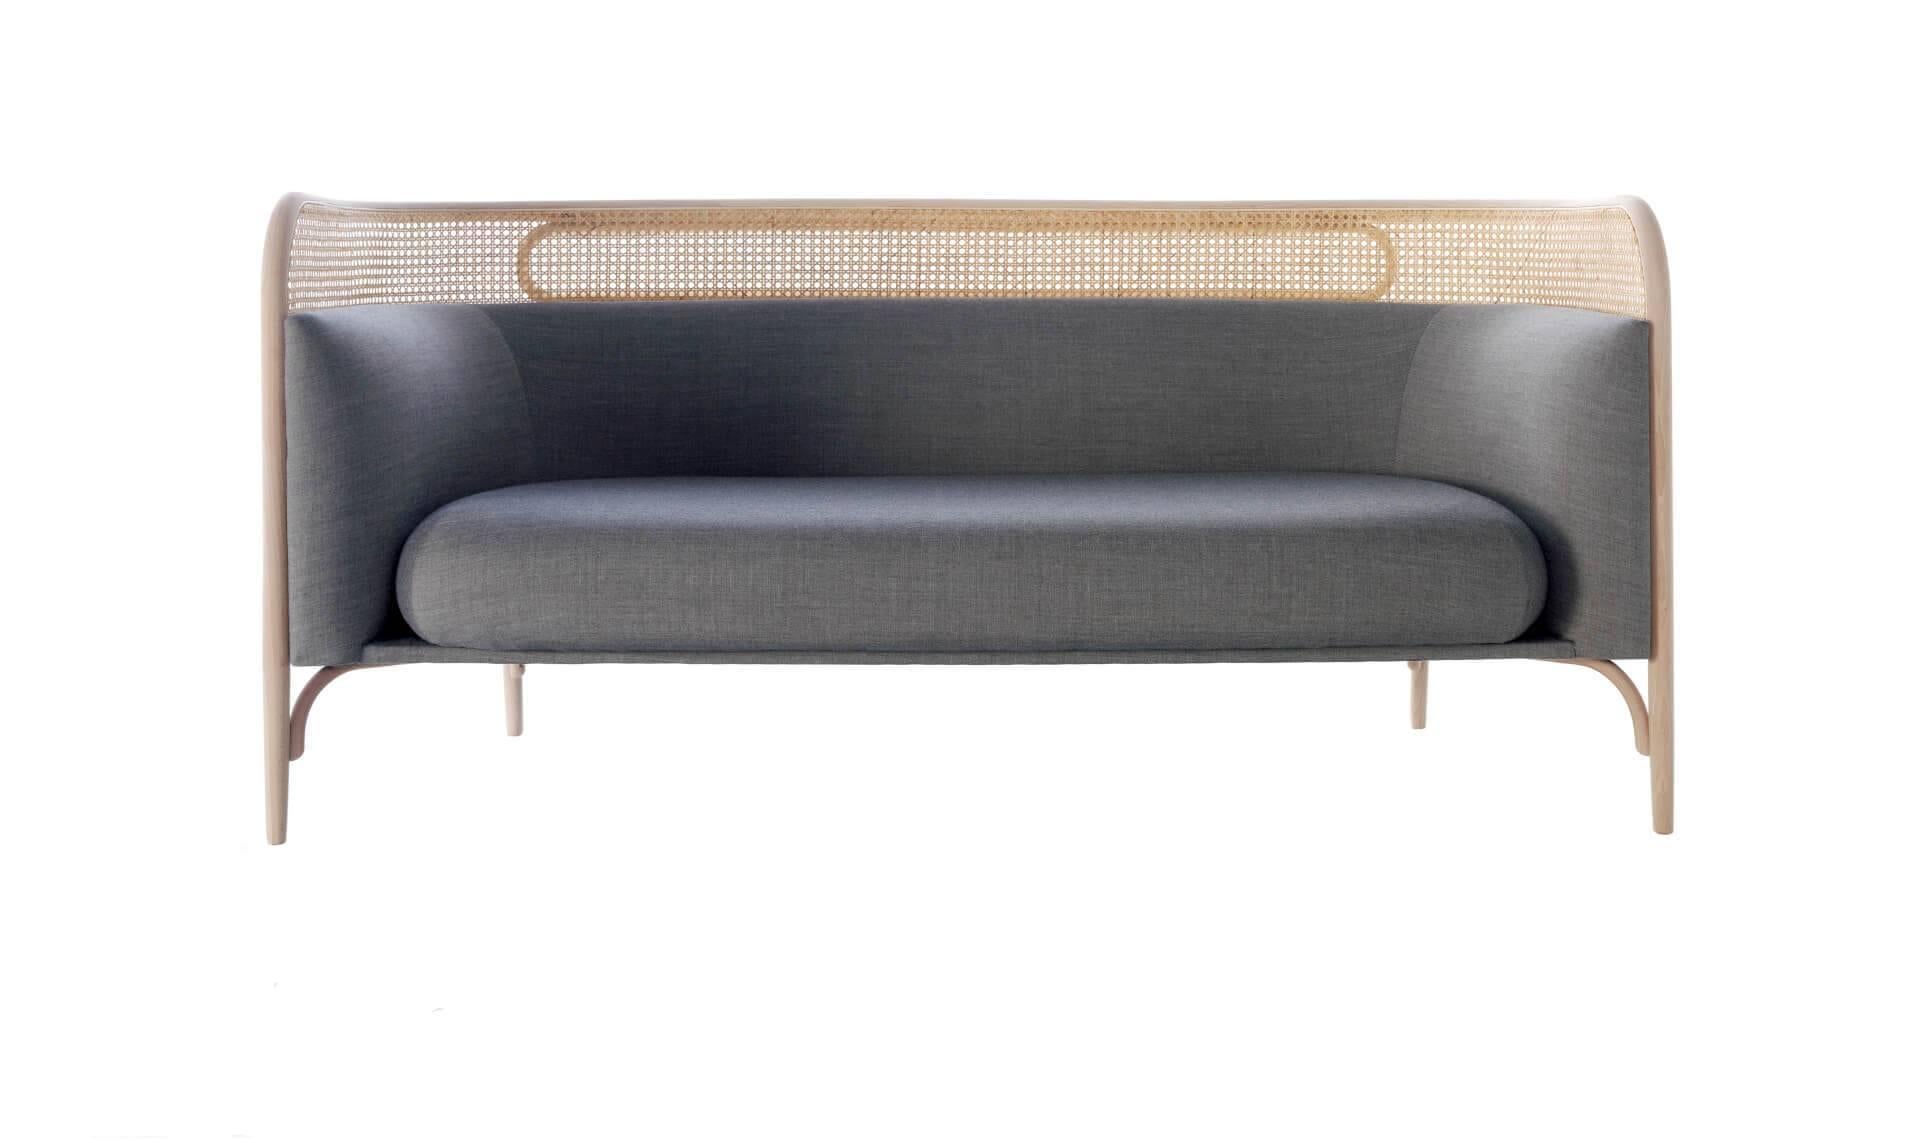 Our collection of upholstery suggests a new concept of comfort designed by Gamfratesi, the Italian-Danish designer duo Stine Gam and Enrico Fratesi. Targa is a family consisting of an elegant two-seat (160 cm) or three-seat (200 cm) sofa, an